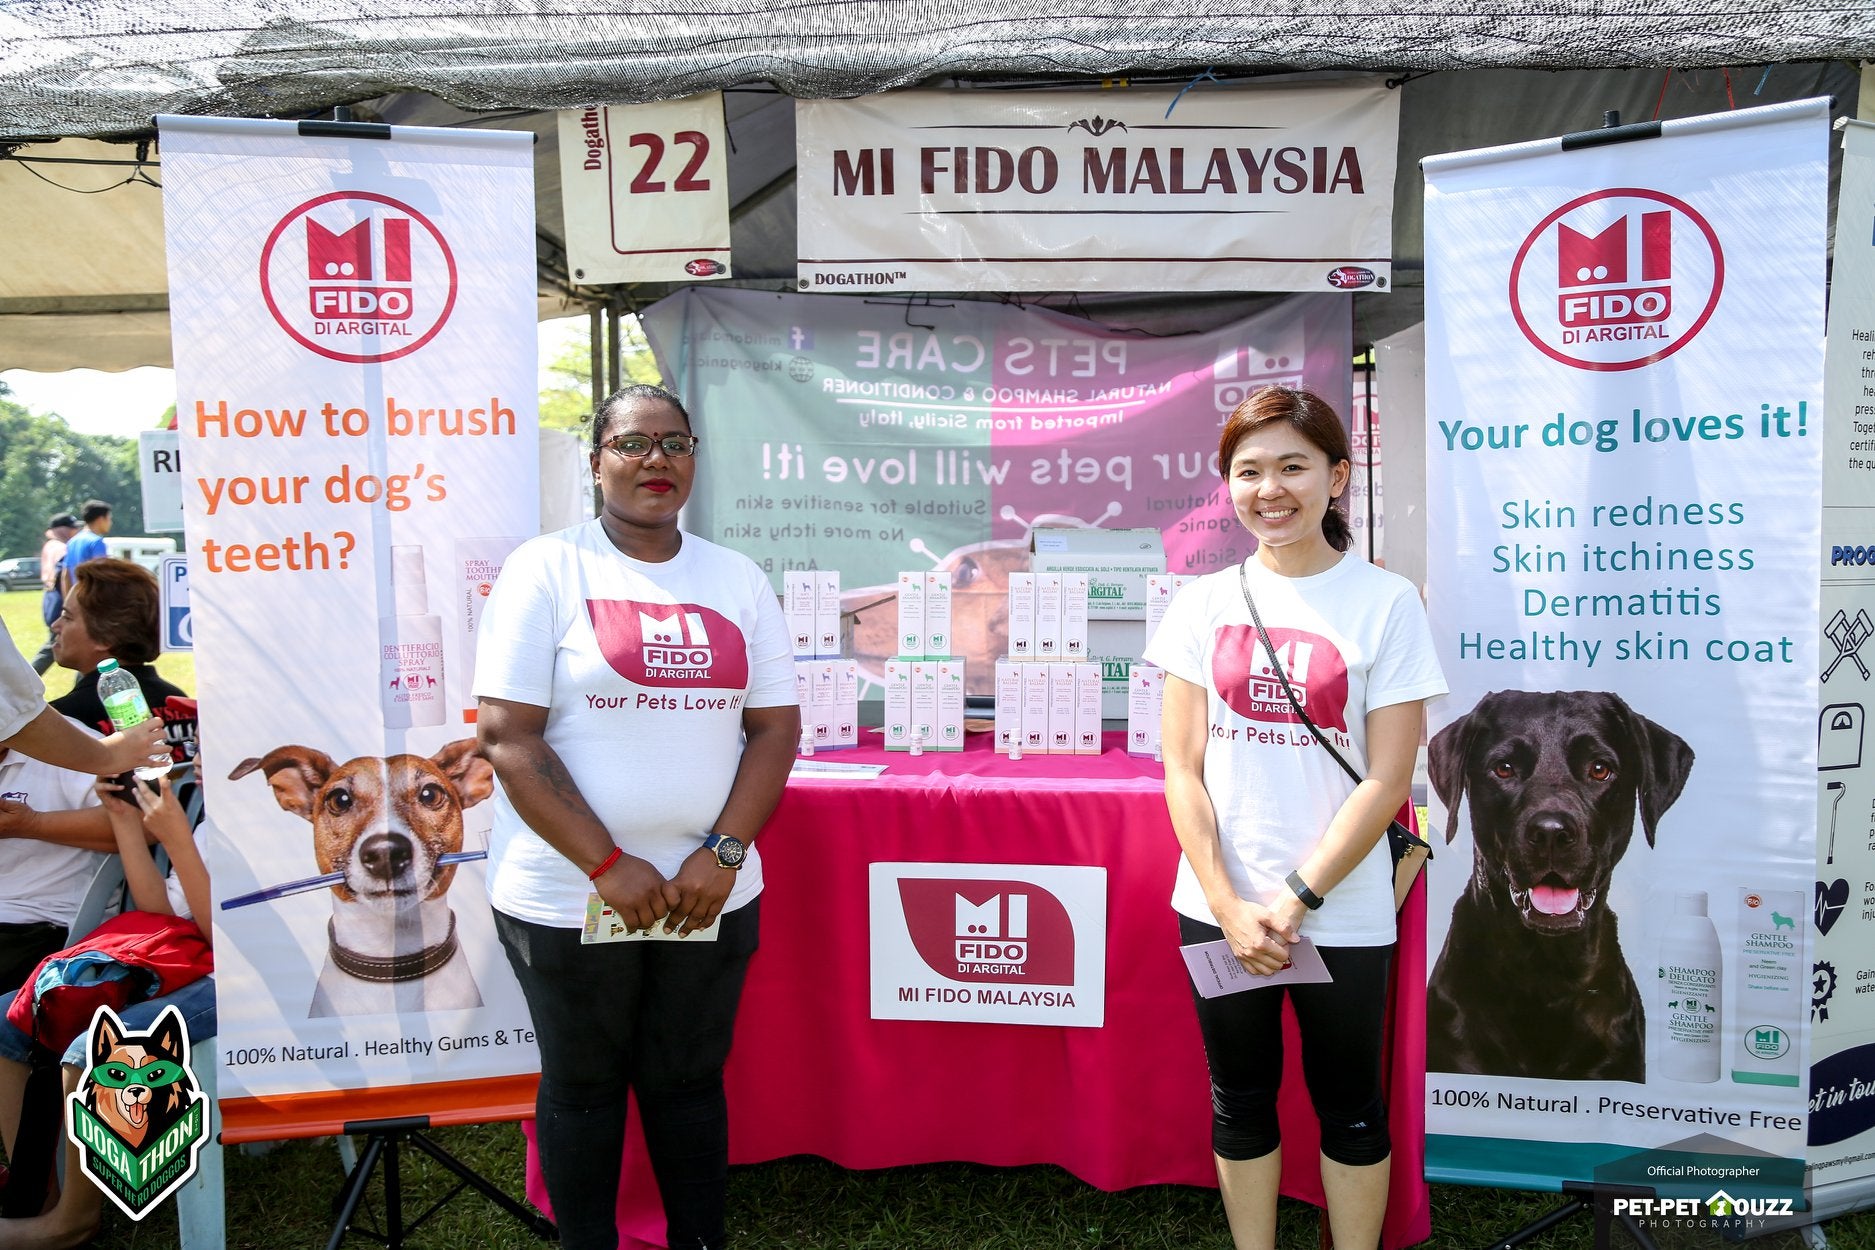 [TEST] This Event in M'sia Has Over 700 Cute Doggos & Is Held In Conjunction with An Amazing Cause! - WORLD OF BUZZ 6